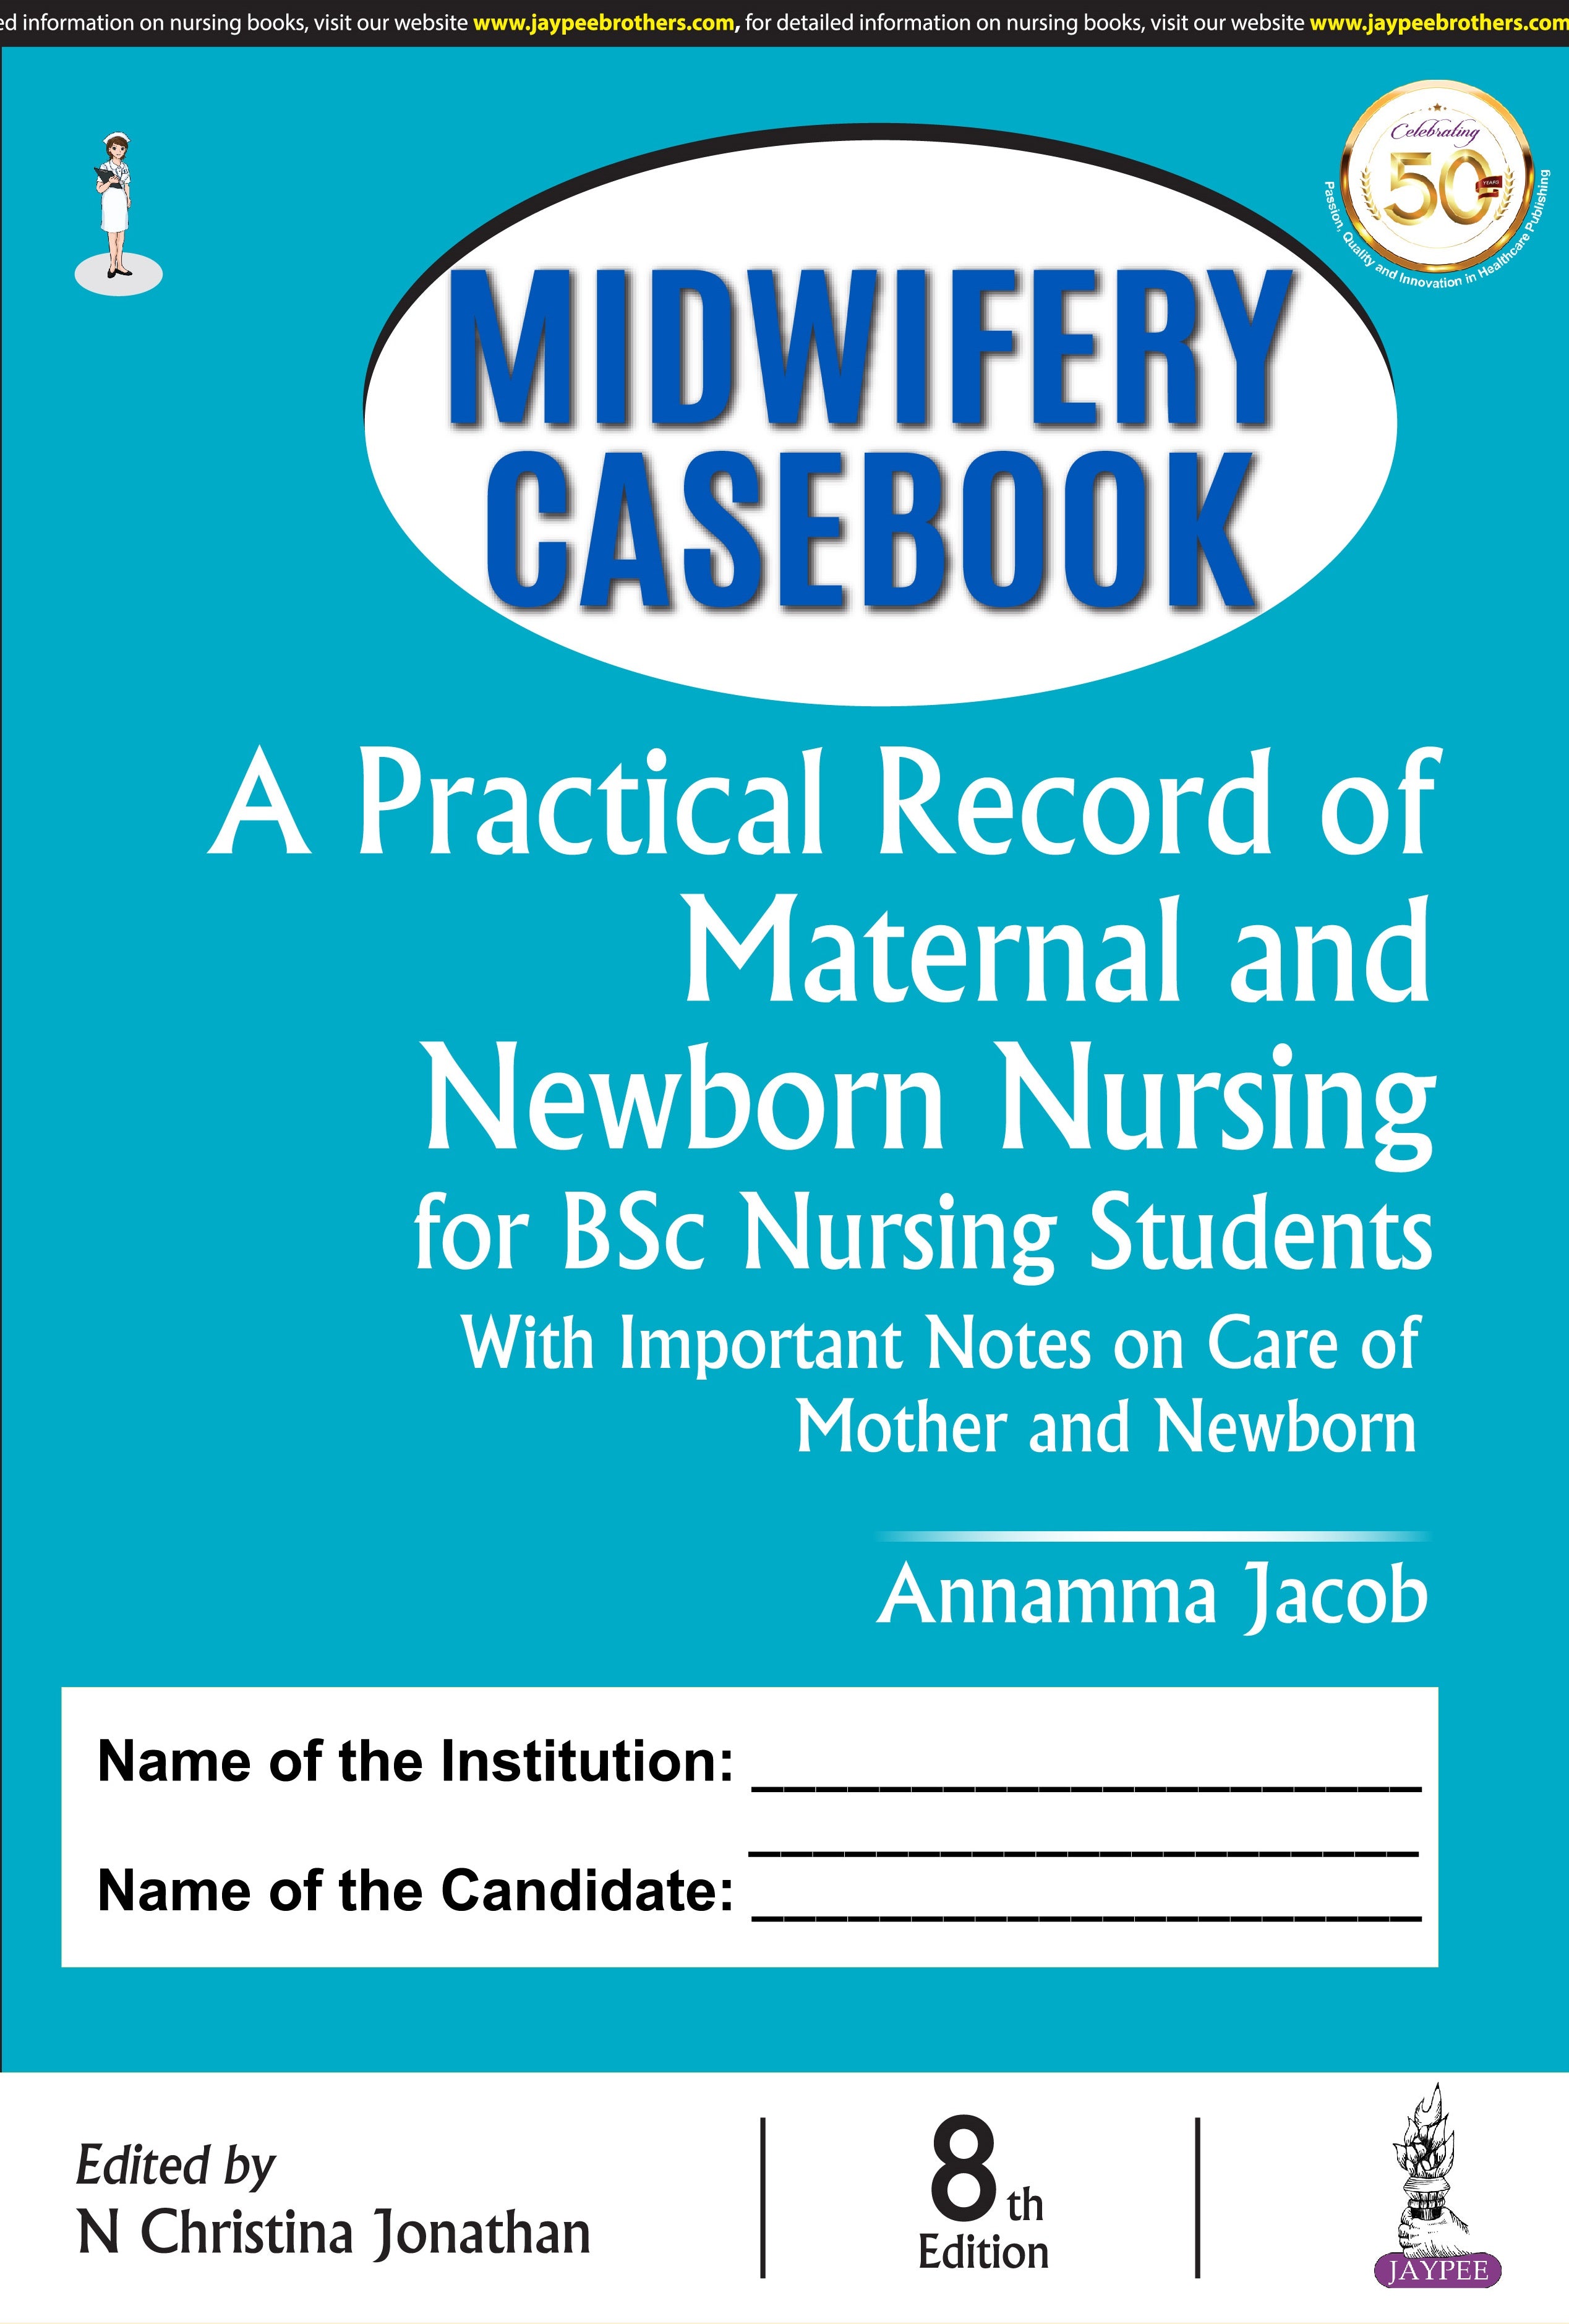 MIDWIFERY CASEBOOK A PRACTICAL RECORD OF MATERNAL AND NEWBORN NURSING (FOR BSC NURSING STUDENTS), 8/E,R.P.,  by ANNAMMA JACOB